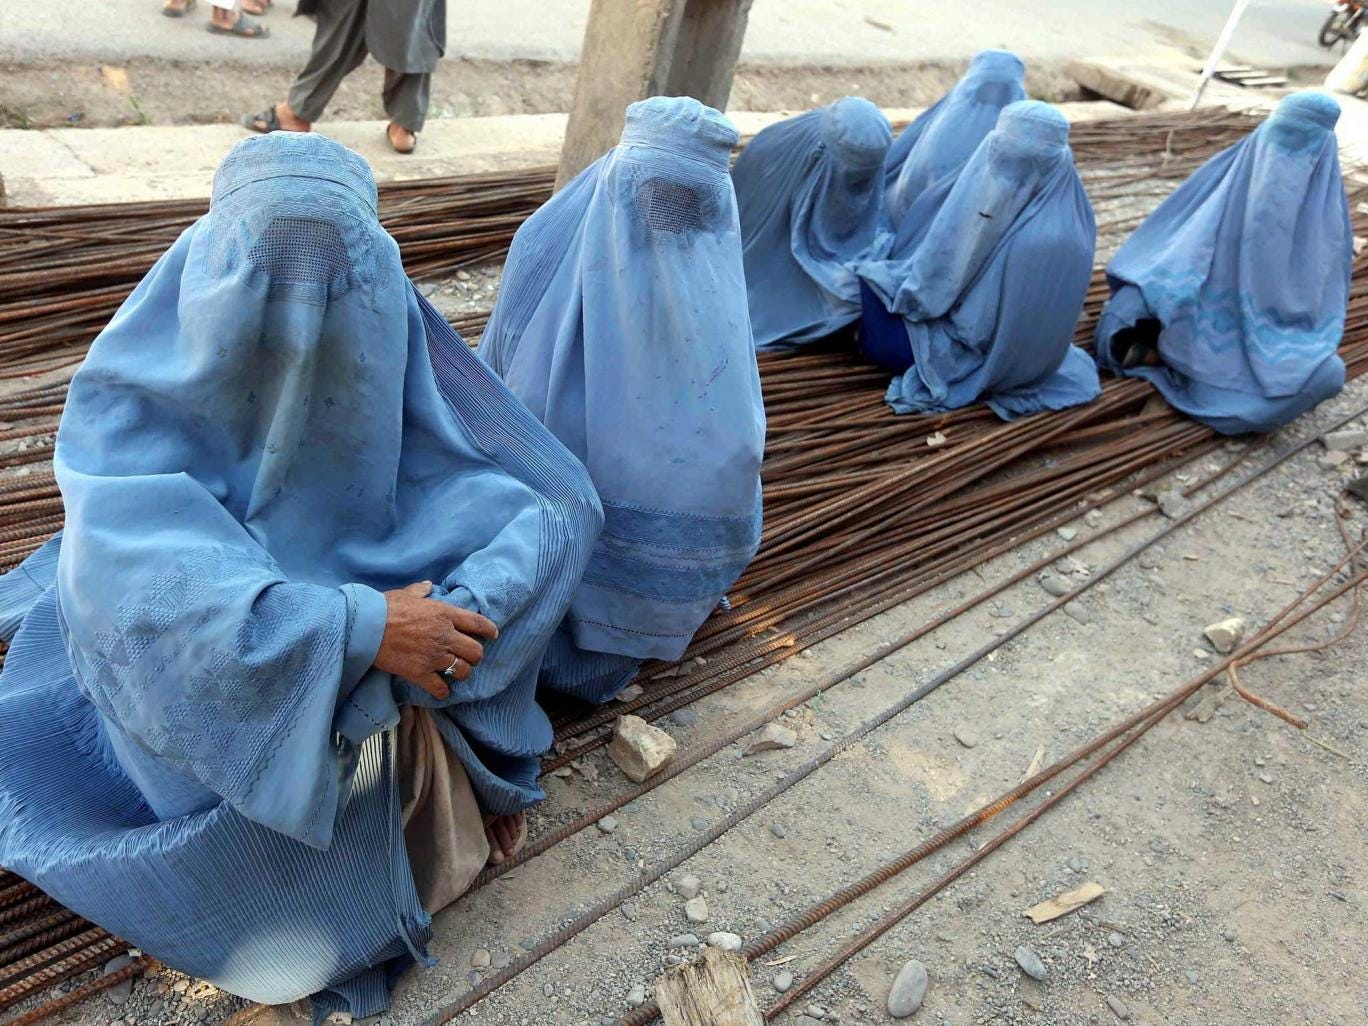 Afghan women launch social media campaign to fight for their identities